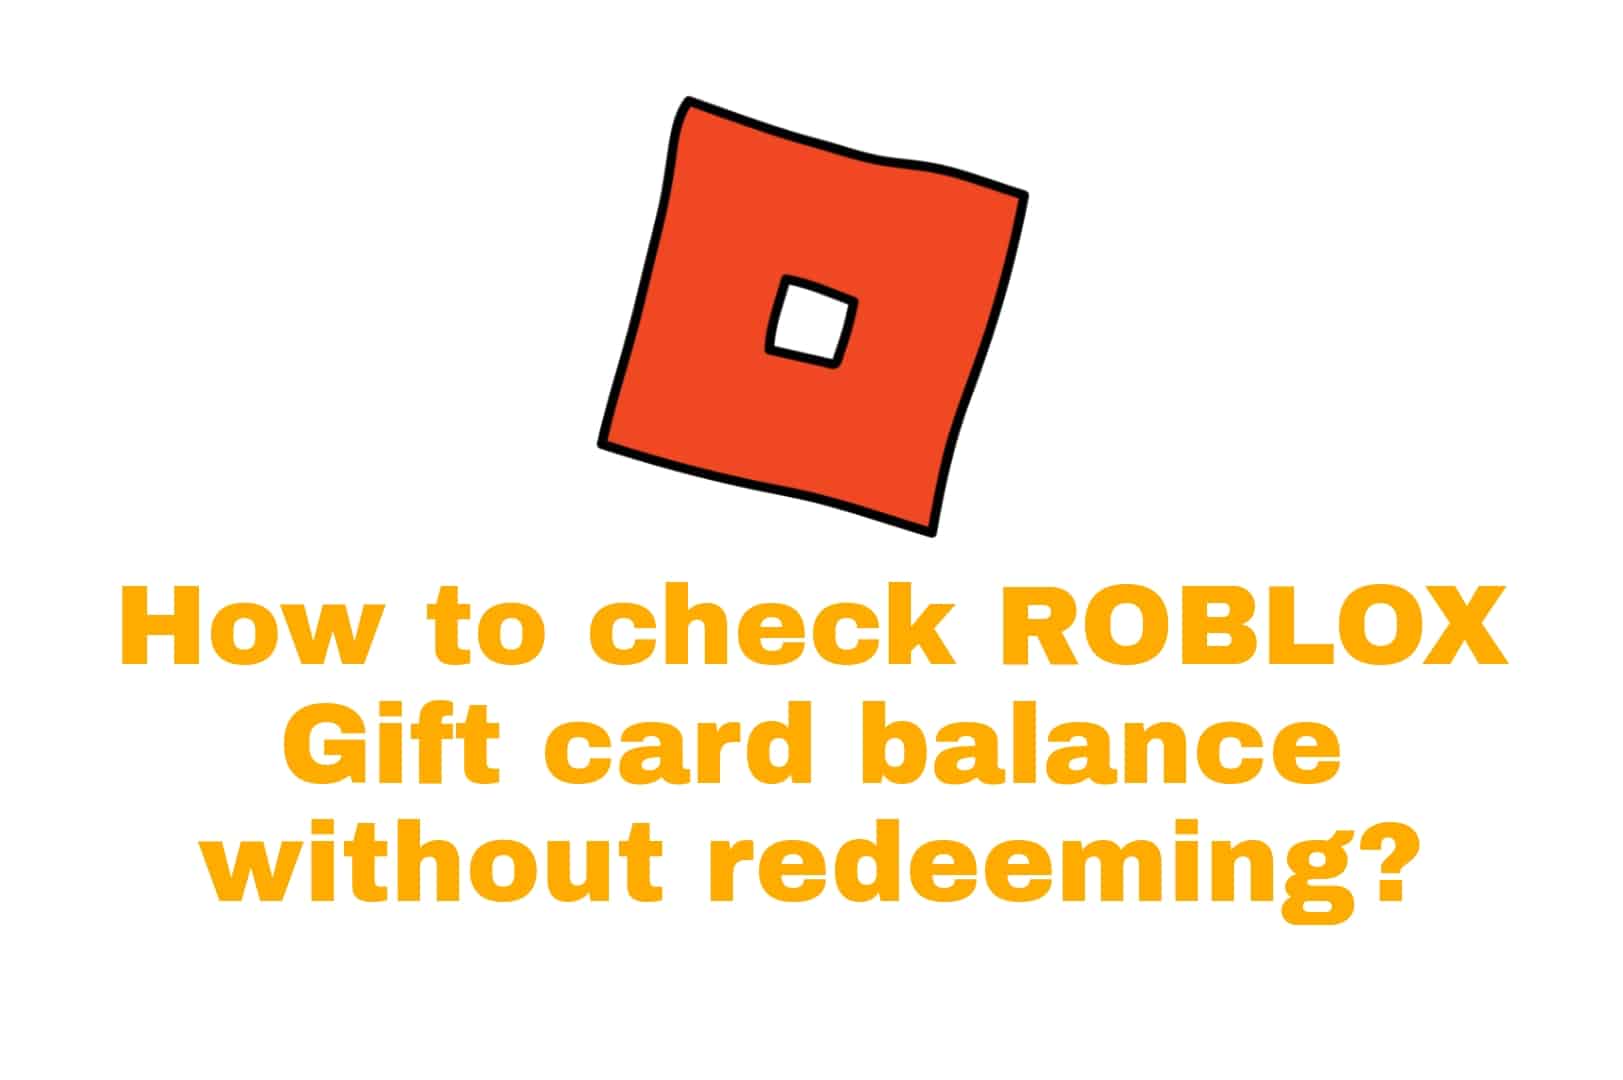 How to check ROBLOX gift card balance without redeeming